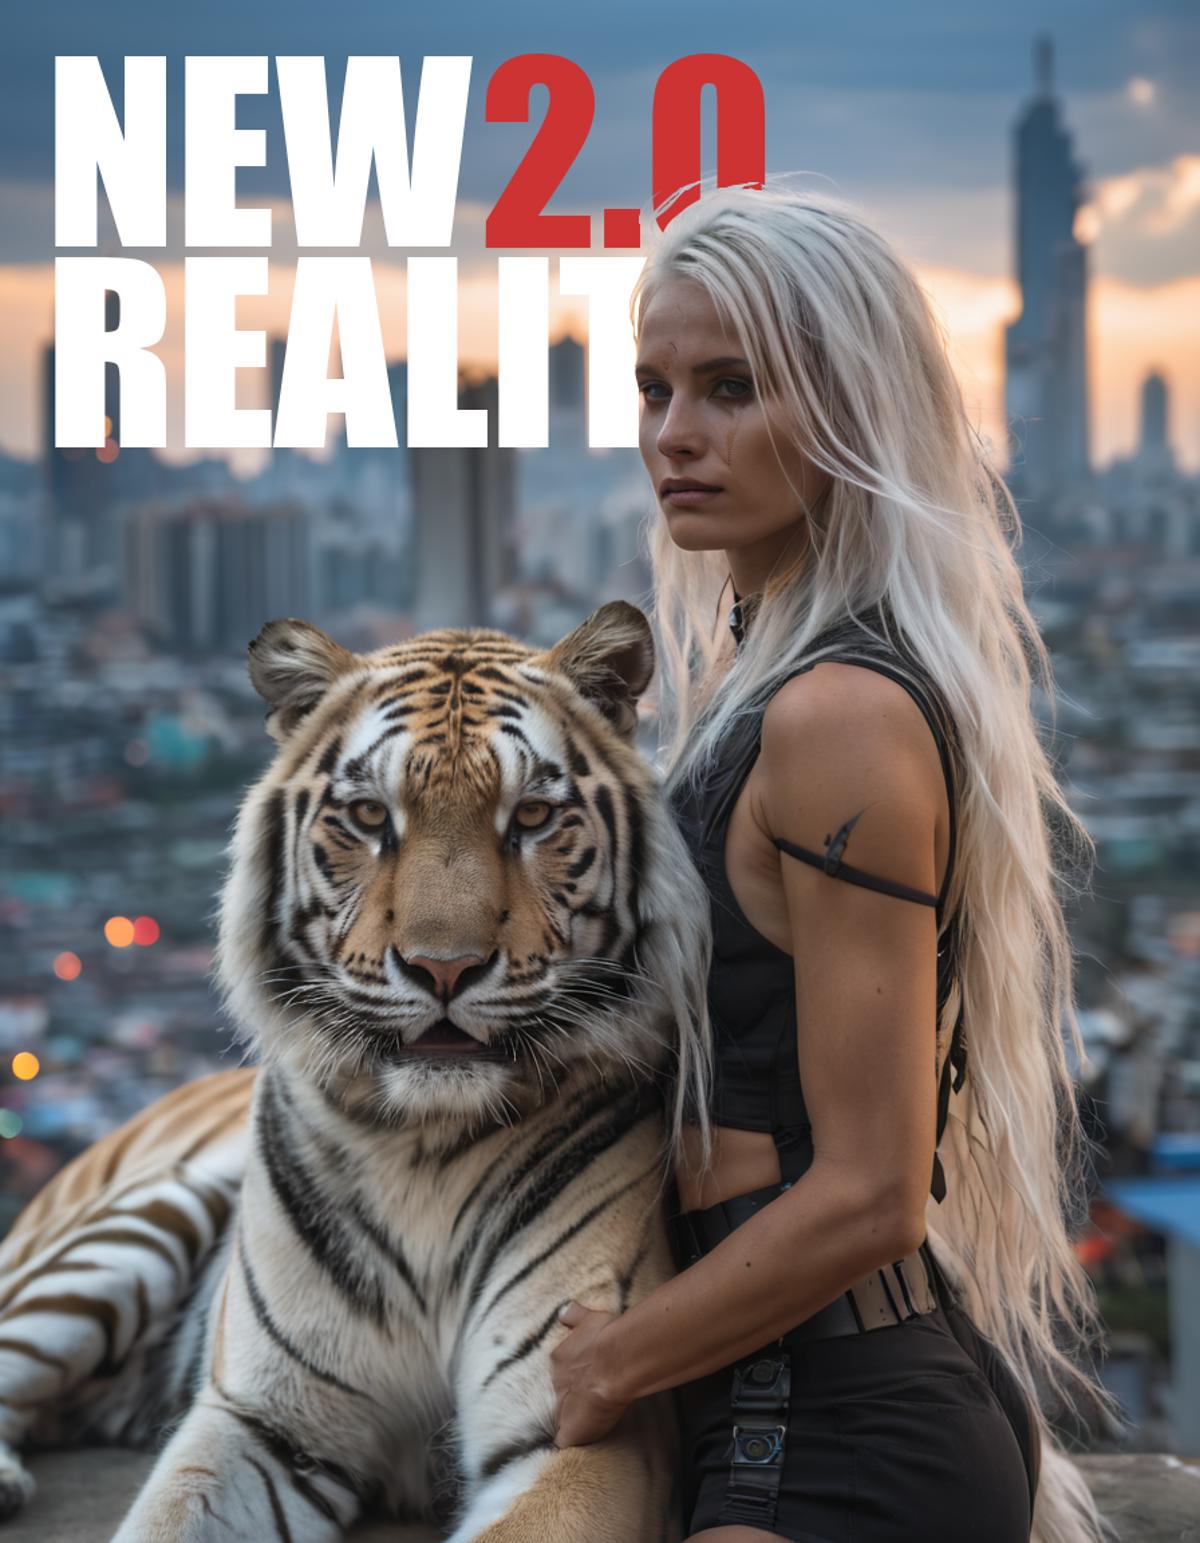 A blonde woman posing with a tiger in a cityscape.